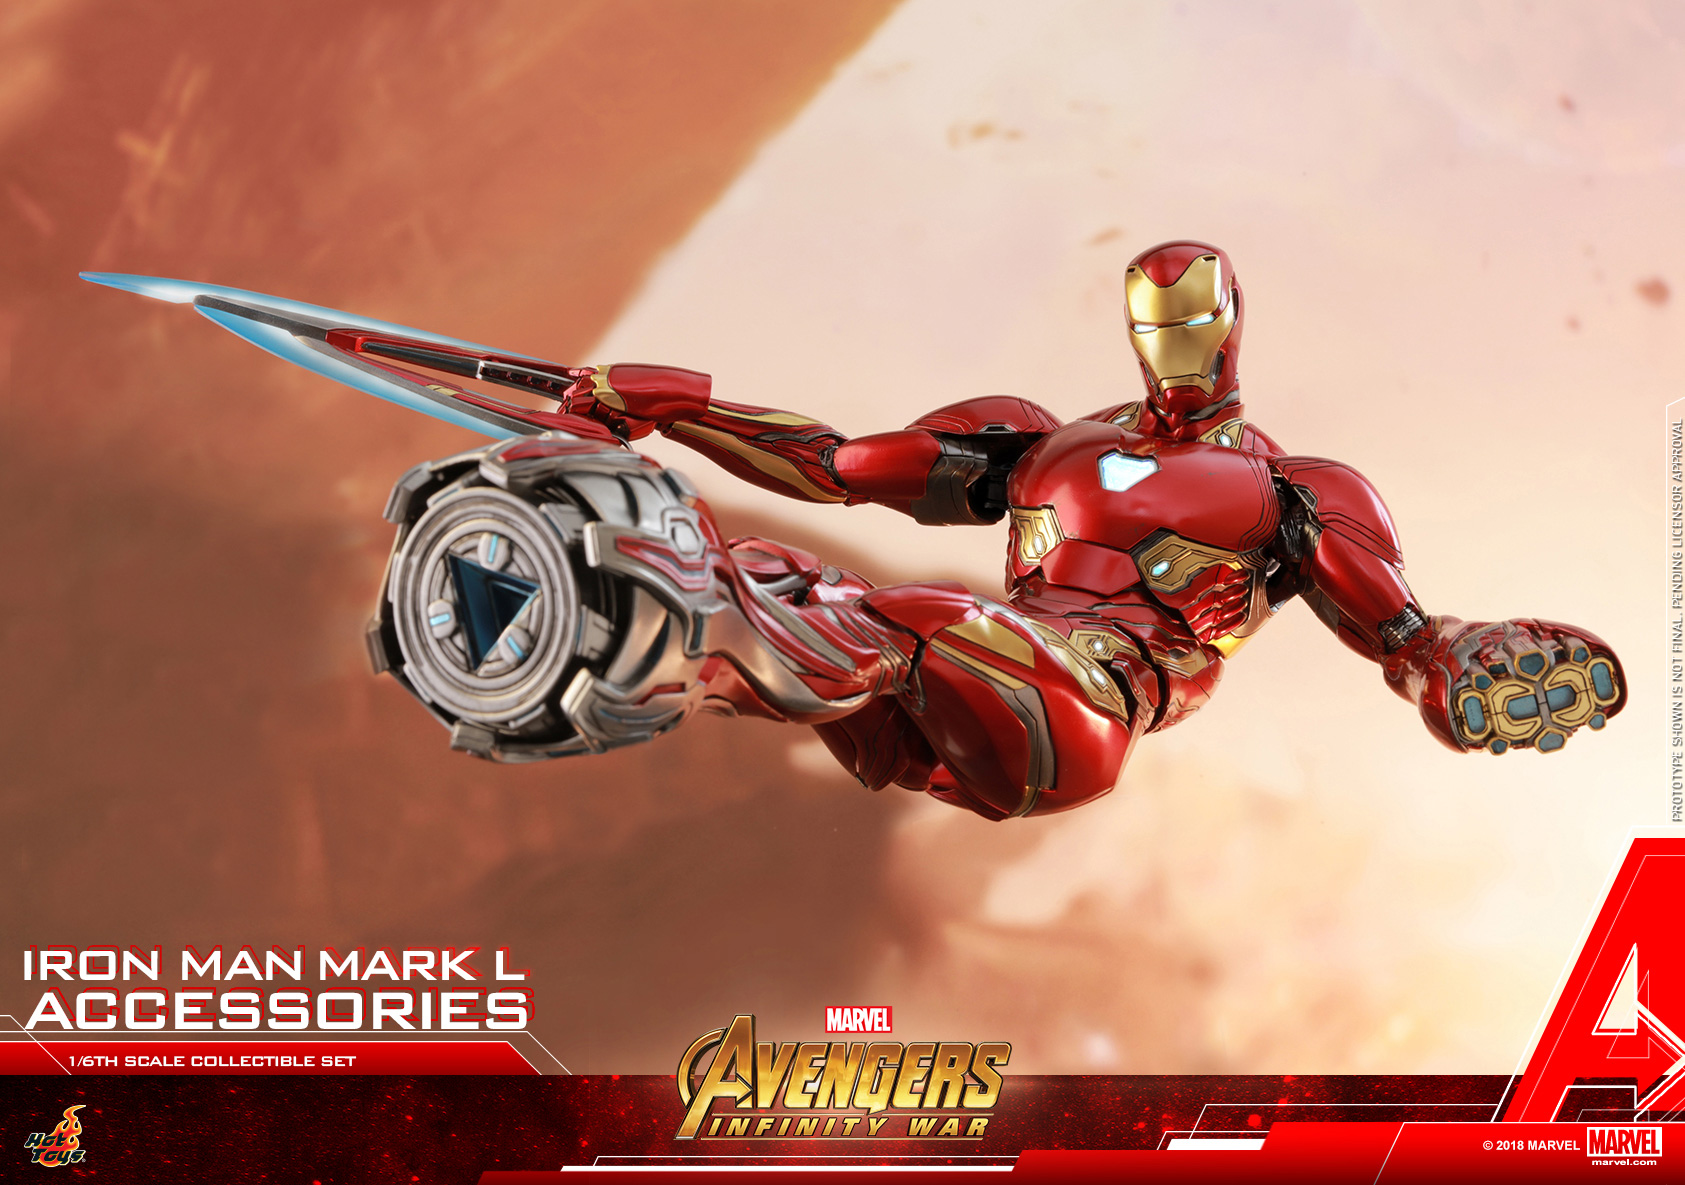 Hot-Toys---Avengers-3---Iron-Man-Mark-L-Accessories-Collectible-Set_PR11